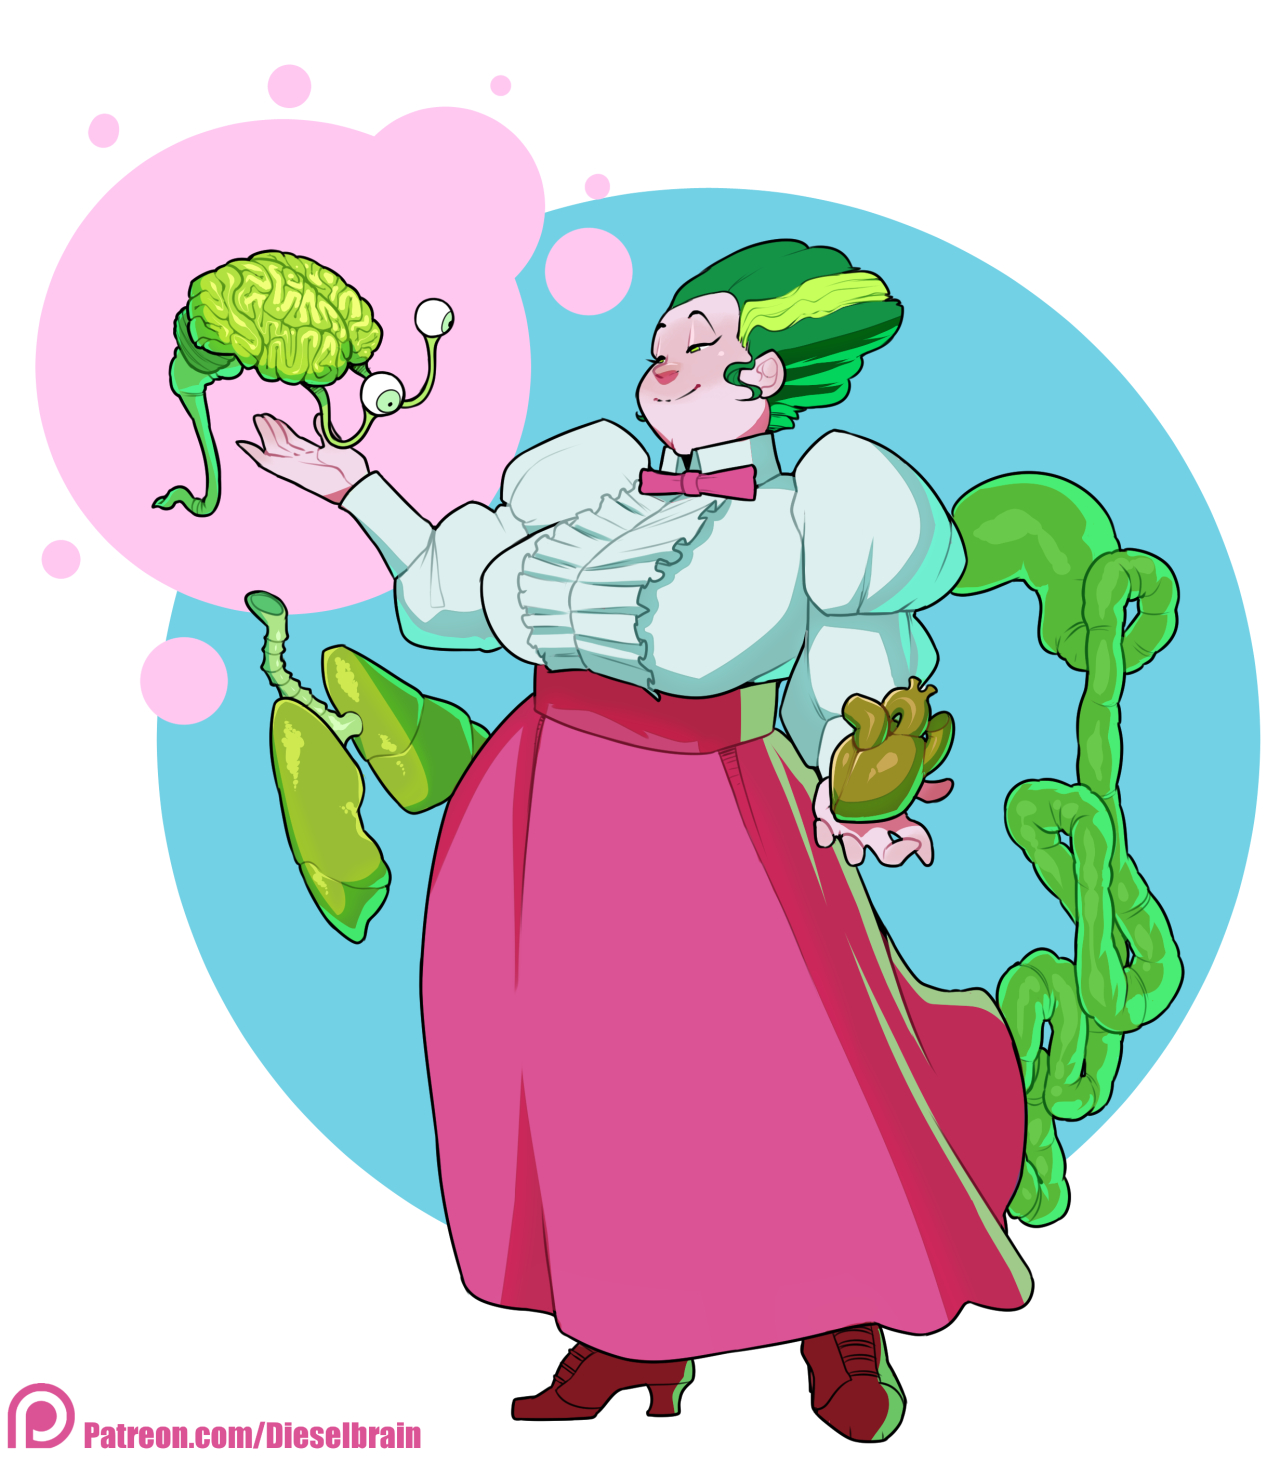 dieselbrain:  This month’s patron choice vote had my patrons ask me to design 3